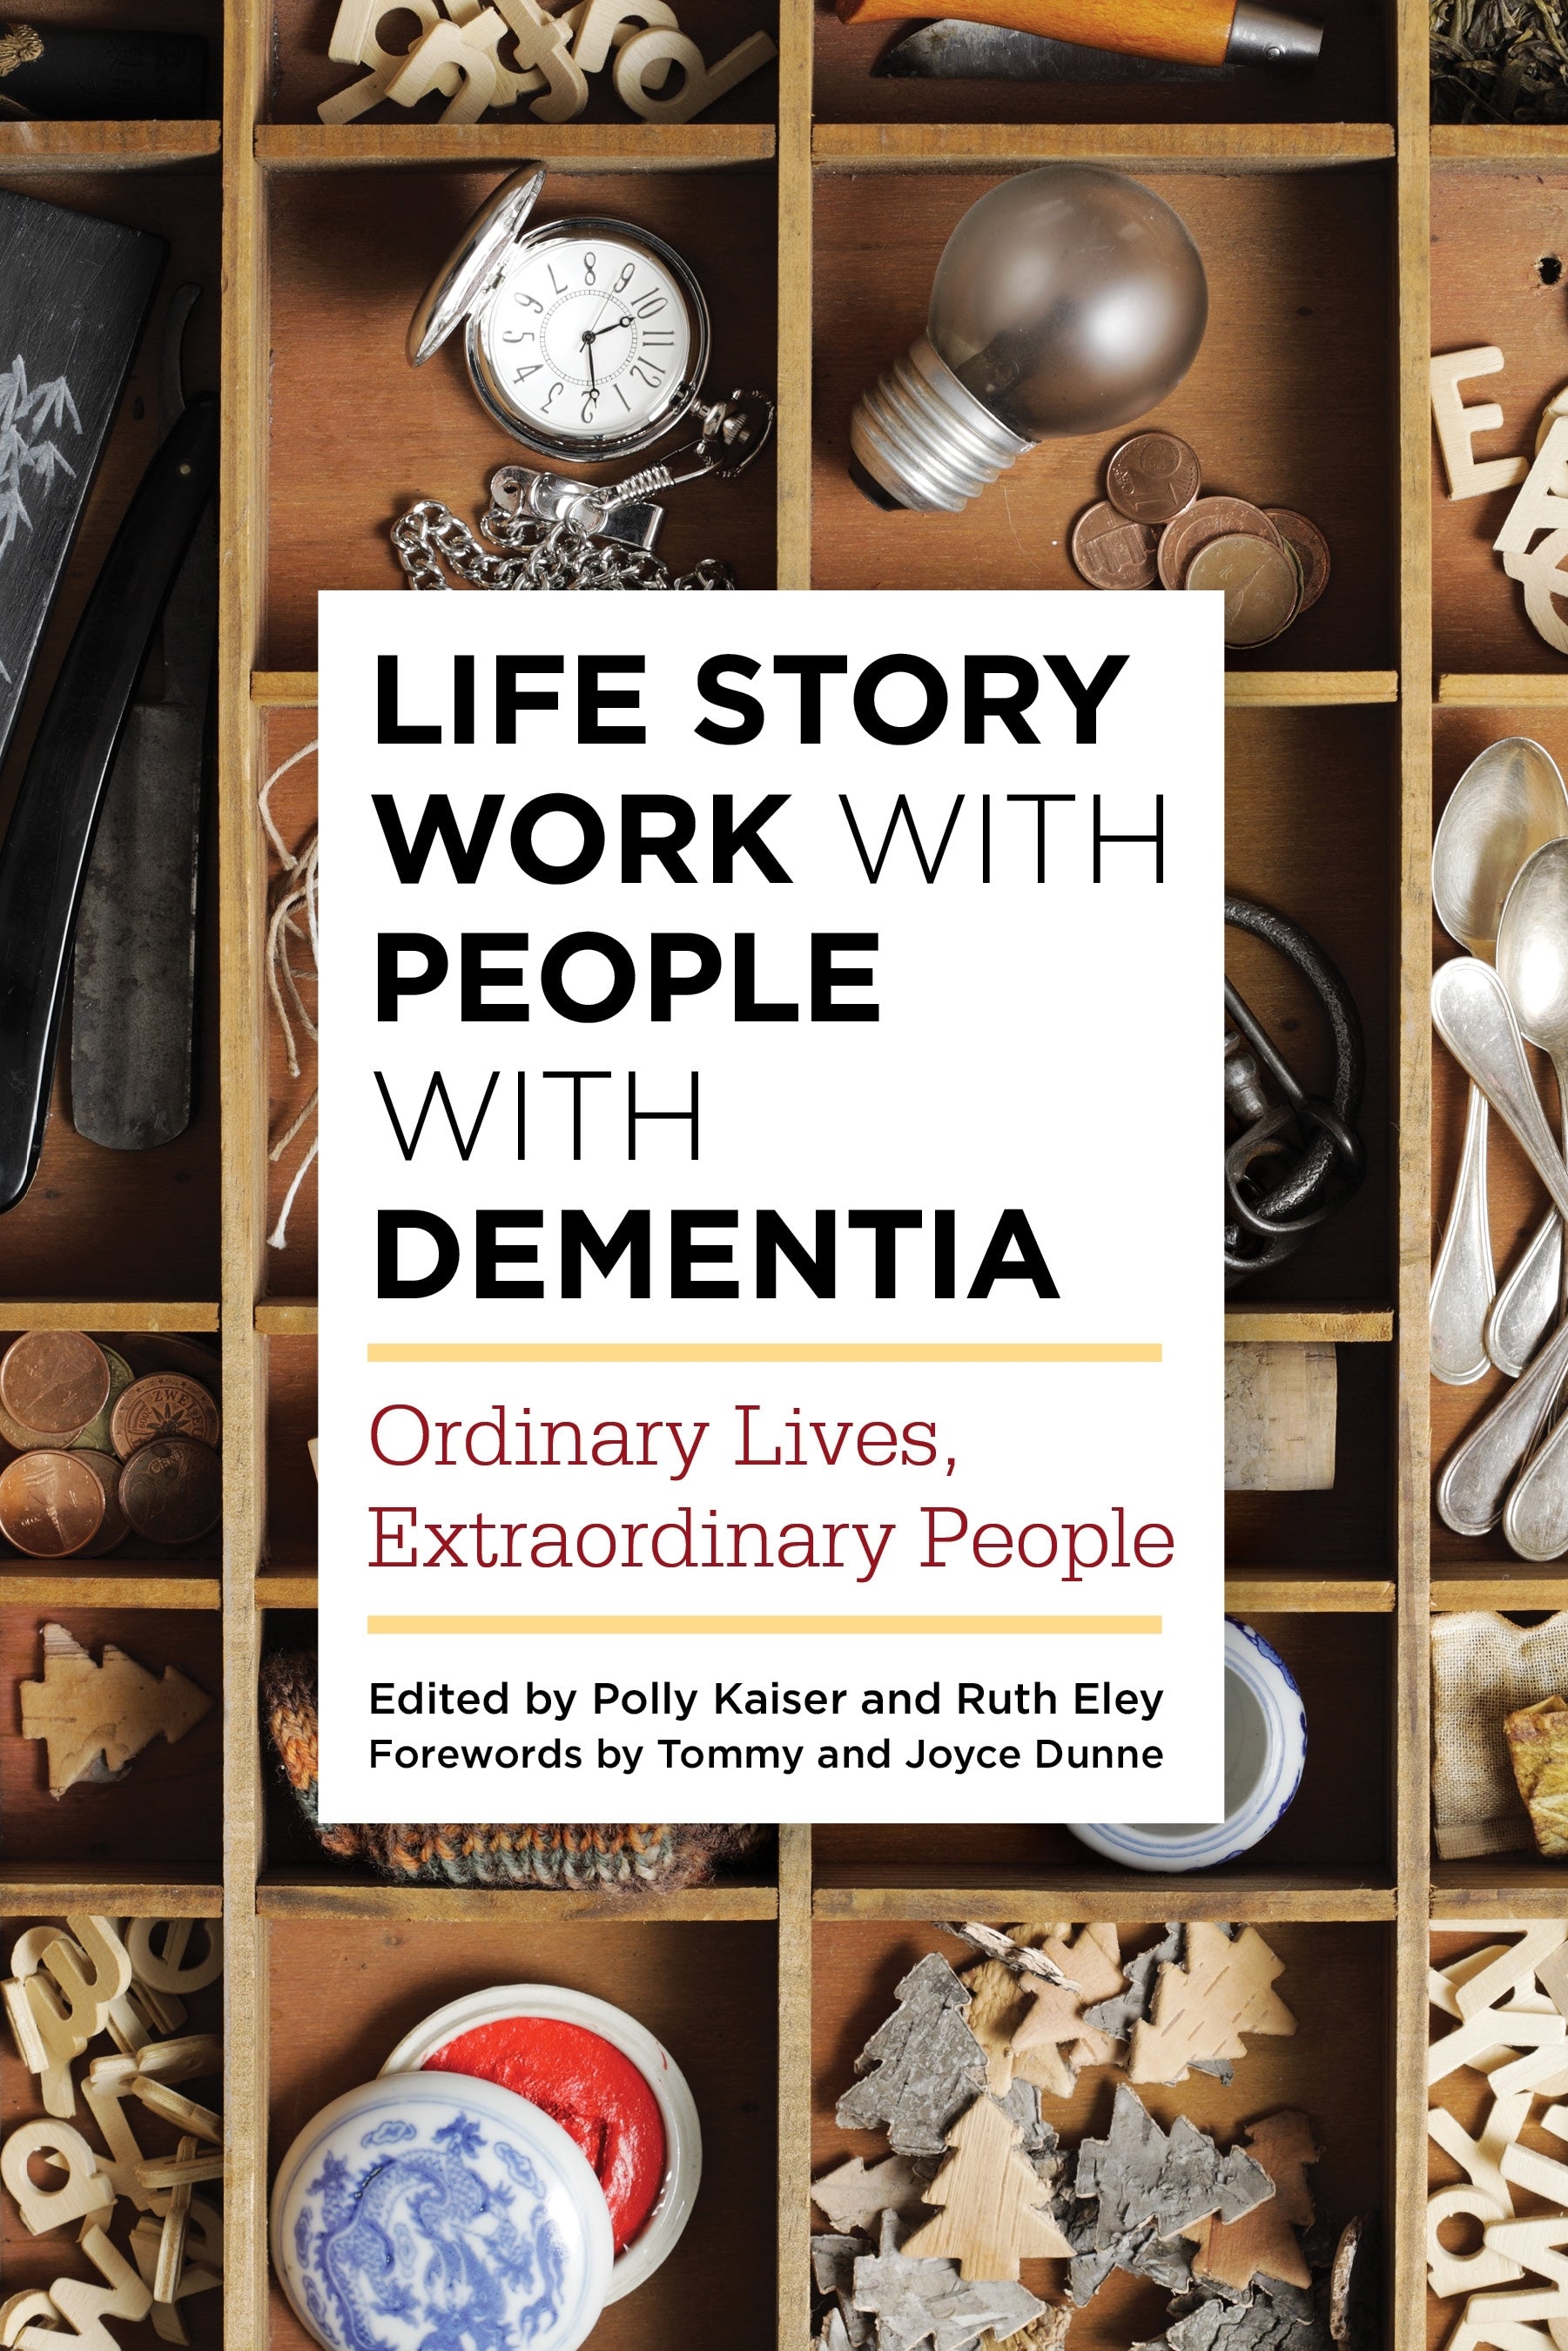 Life Story Work with People with Dementia by No Author Listed, Polly Kaiser, Ruth Eley, Tommy Dunne, Joyce Dunne